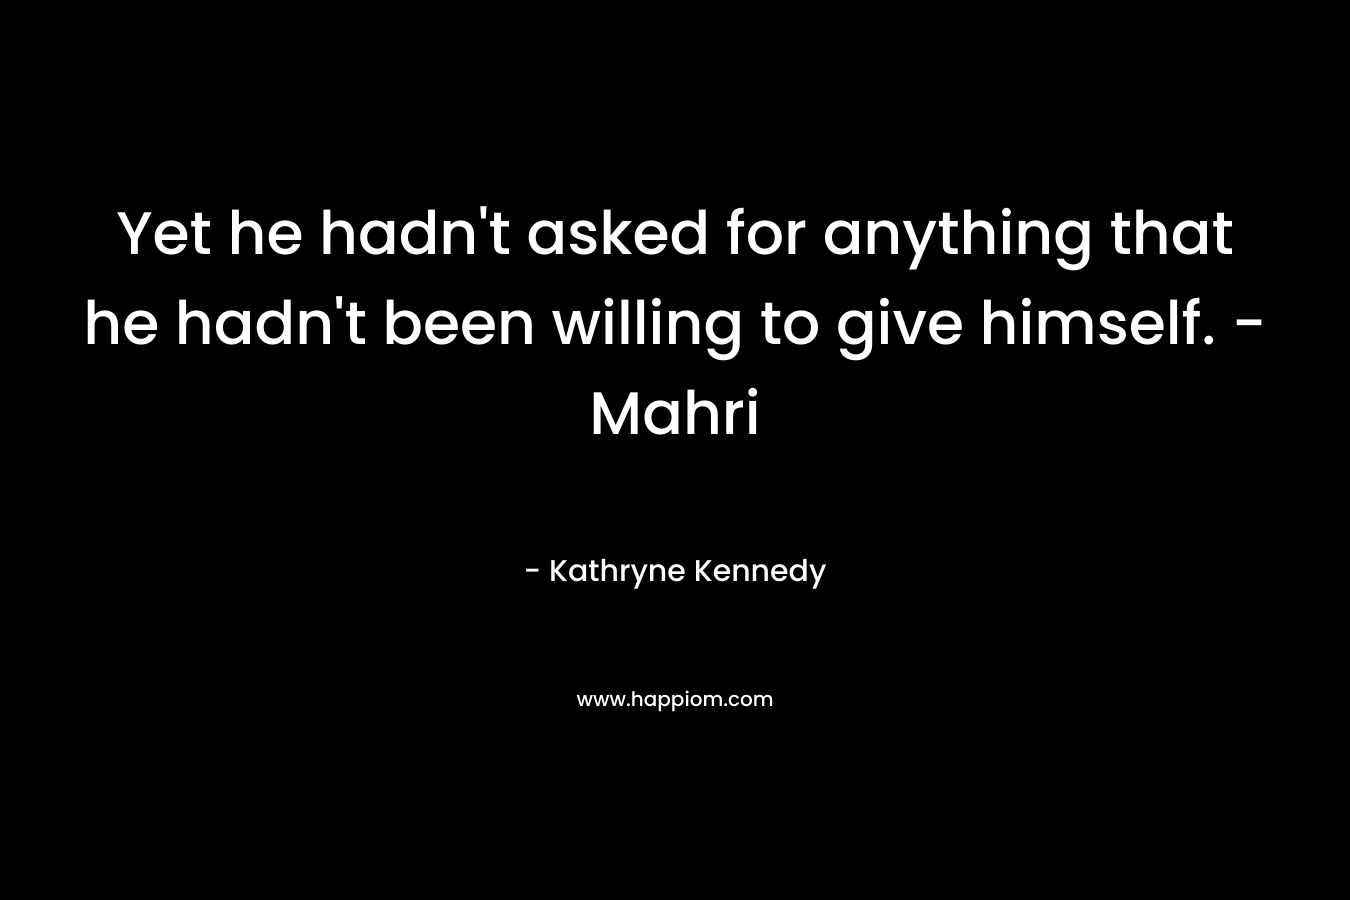 Yet he hadn't asked for anything that he hadn't been willing to give himself. - Mahri